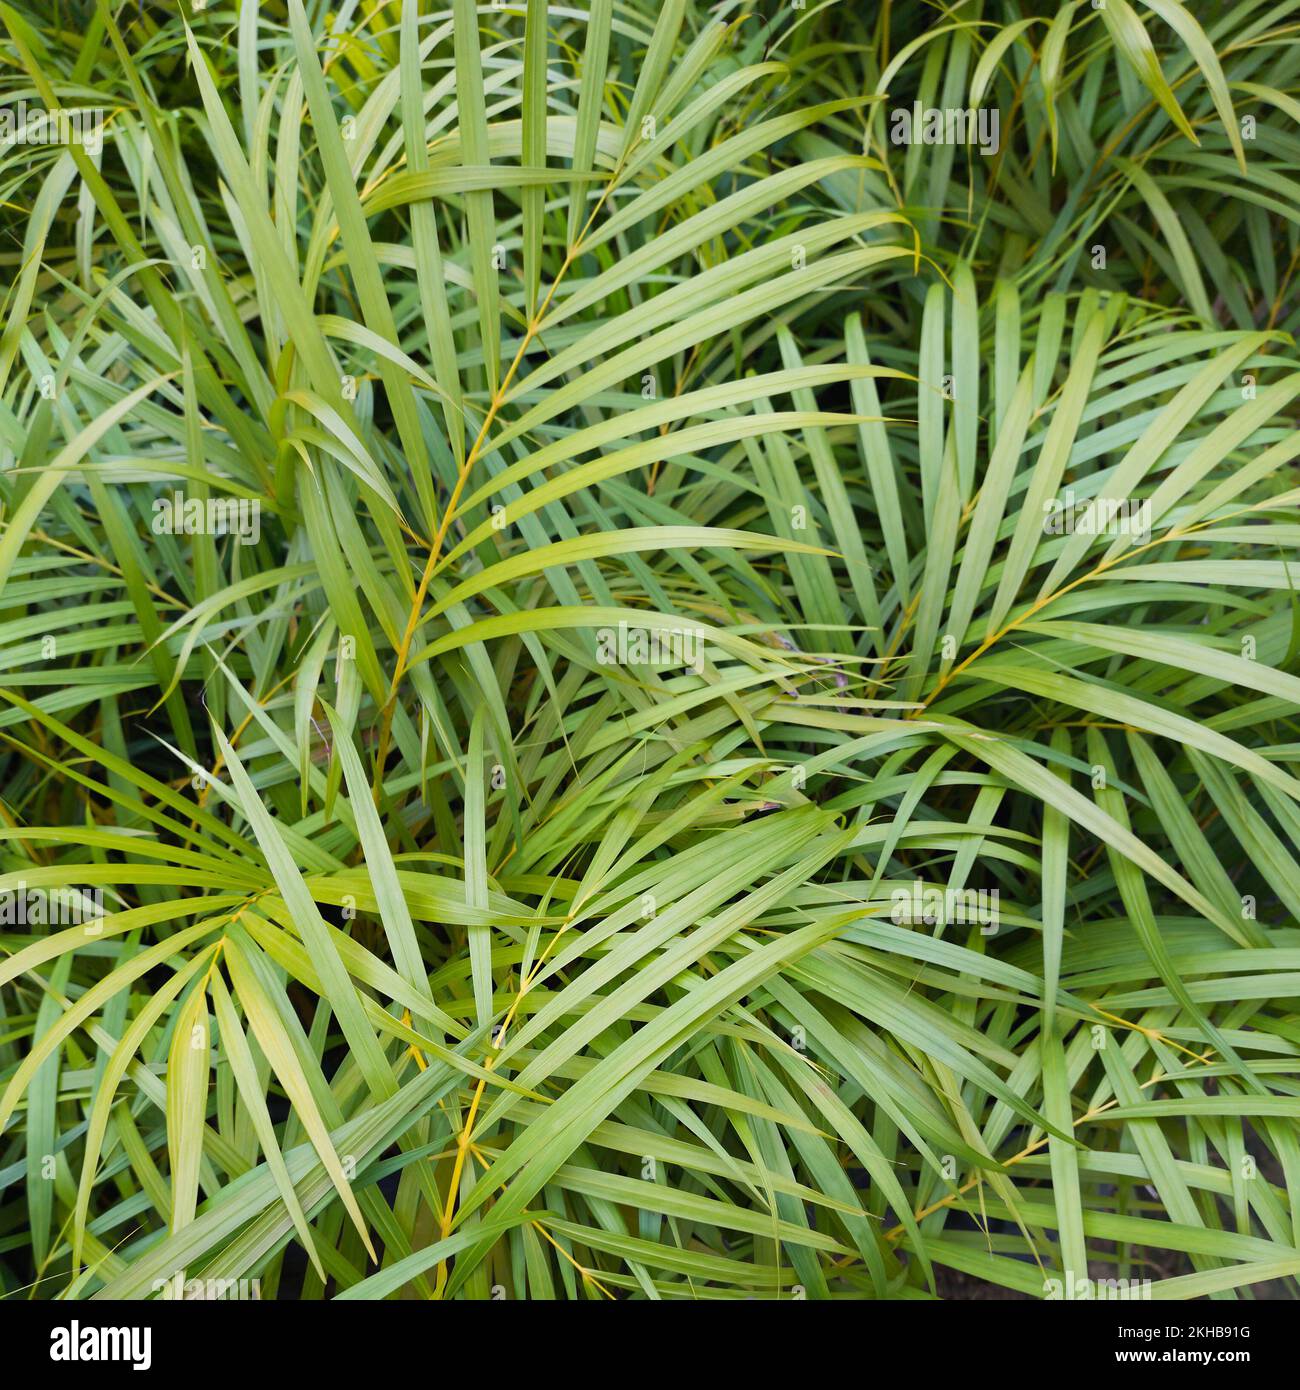 abstract of palm leaves, tropical green foliage, garden or forest background in full frame, close-up in selective focus, environmental concept Stock Photo